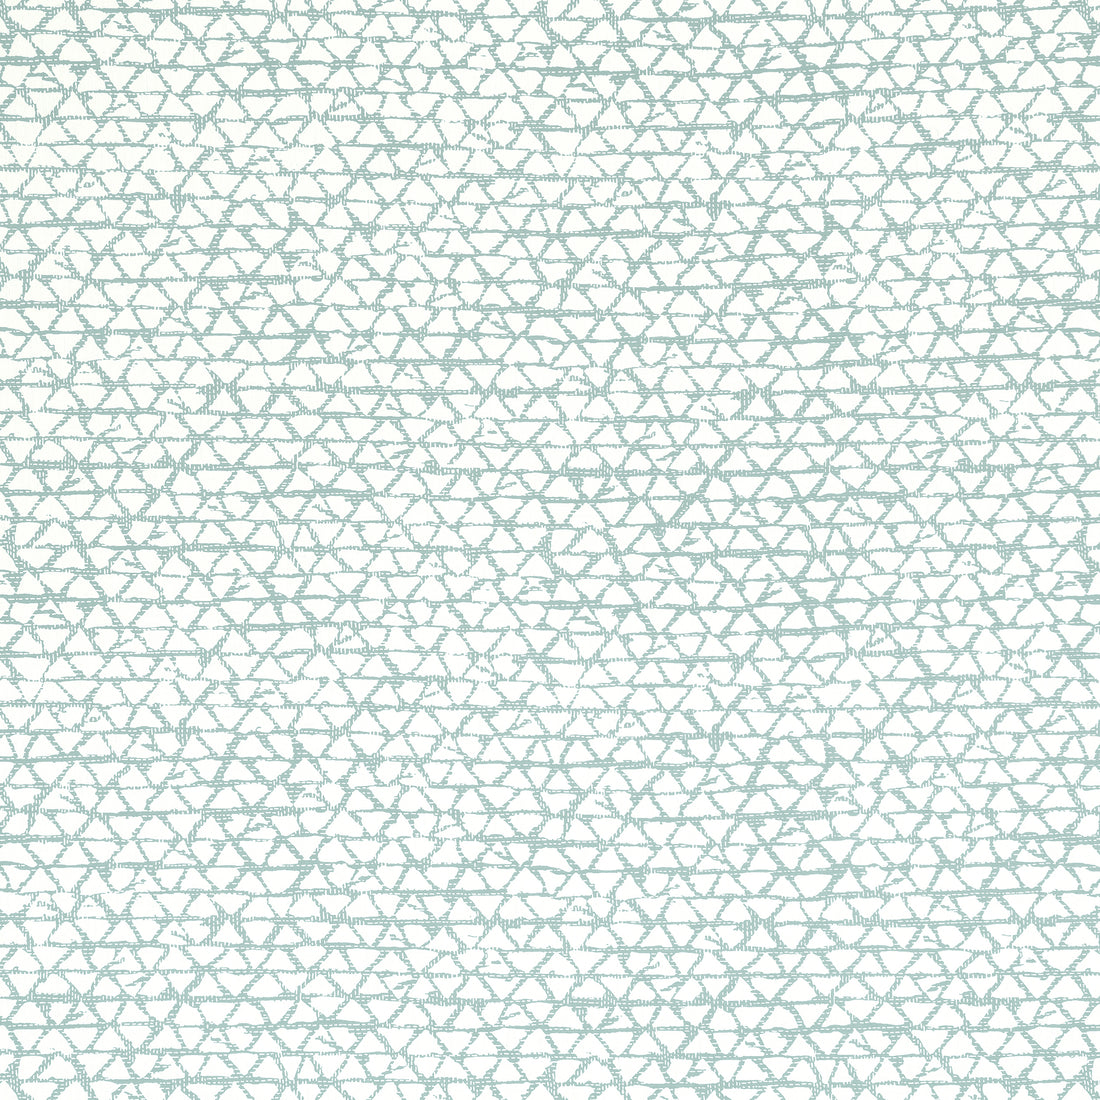 Maluku fabric in seaglass color - pattern number F981329 - by Thibaut in the Montecito collection